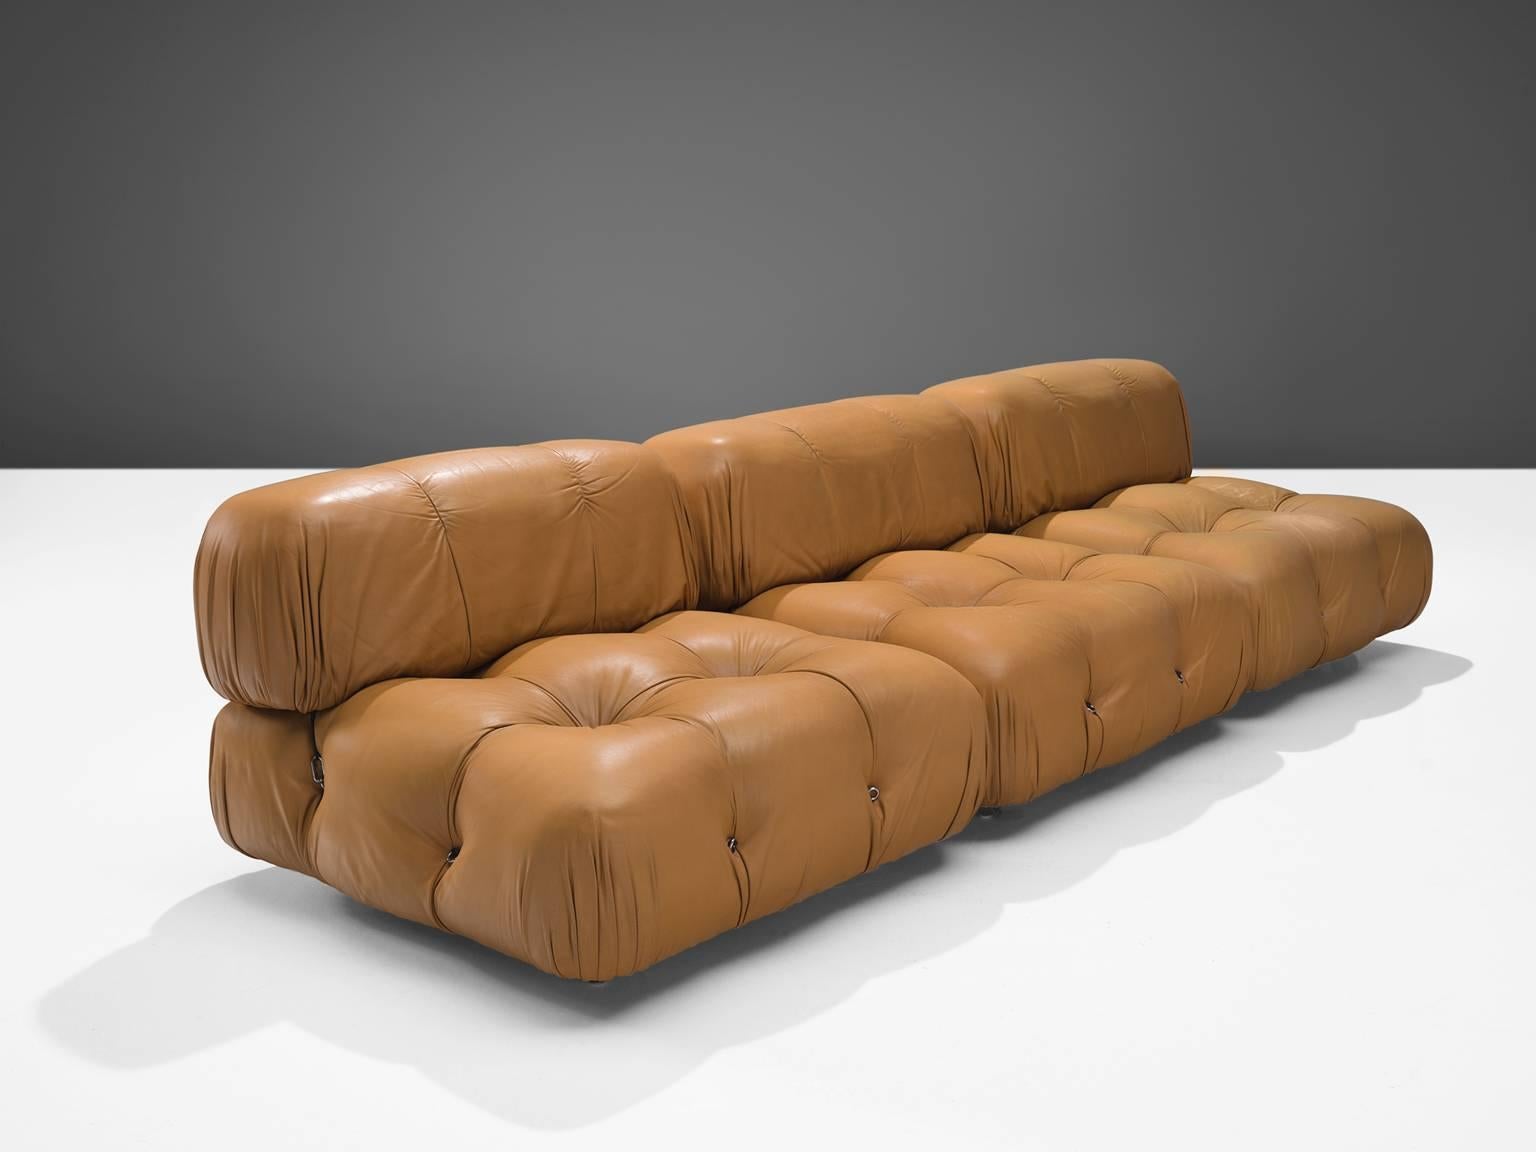 Mario Bellini, modular 'Camaleonda' sofa in original cognac leather upholstery, Italy, 1972.

The sectional elements of this can be used freely and apart from one another. The backs and armrests are provided with rings and carabiners, which allows